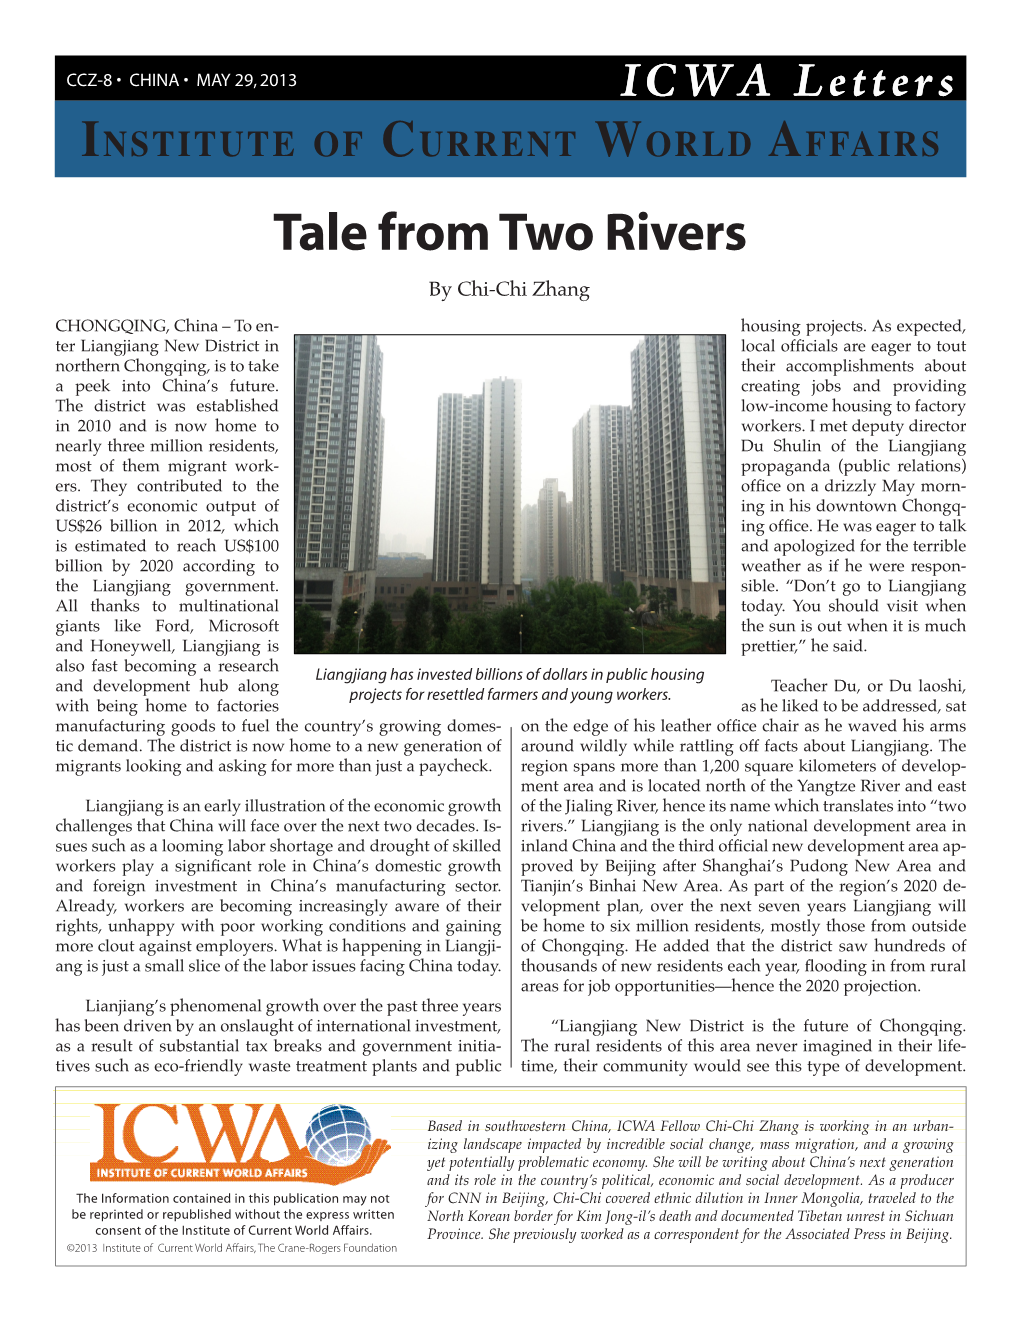 Tale from Two Rivers